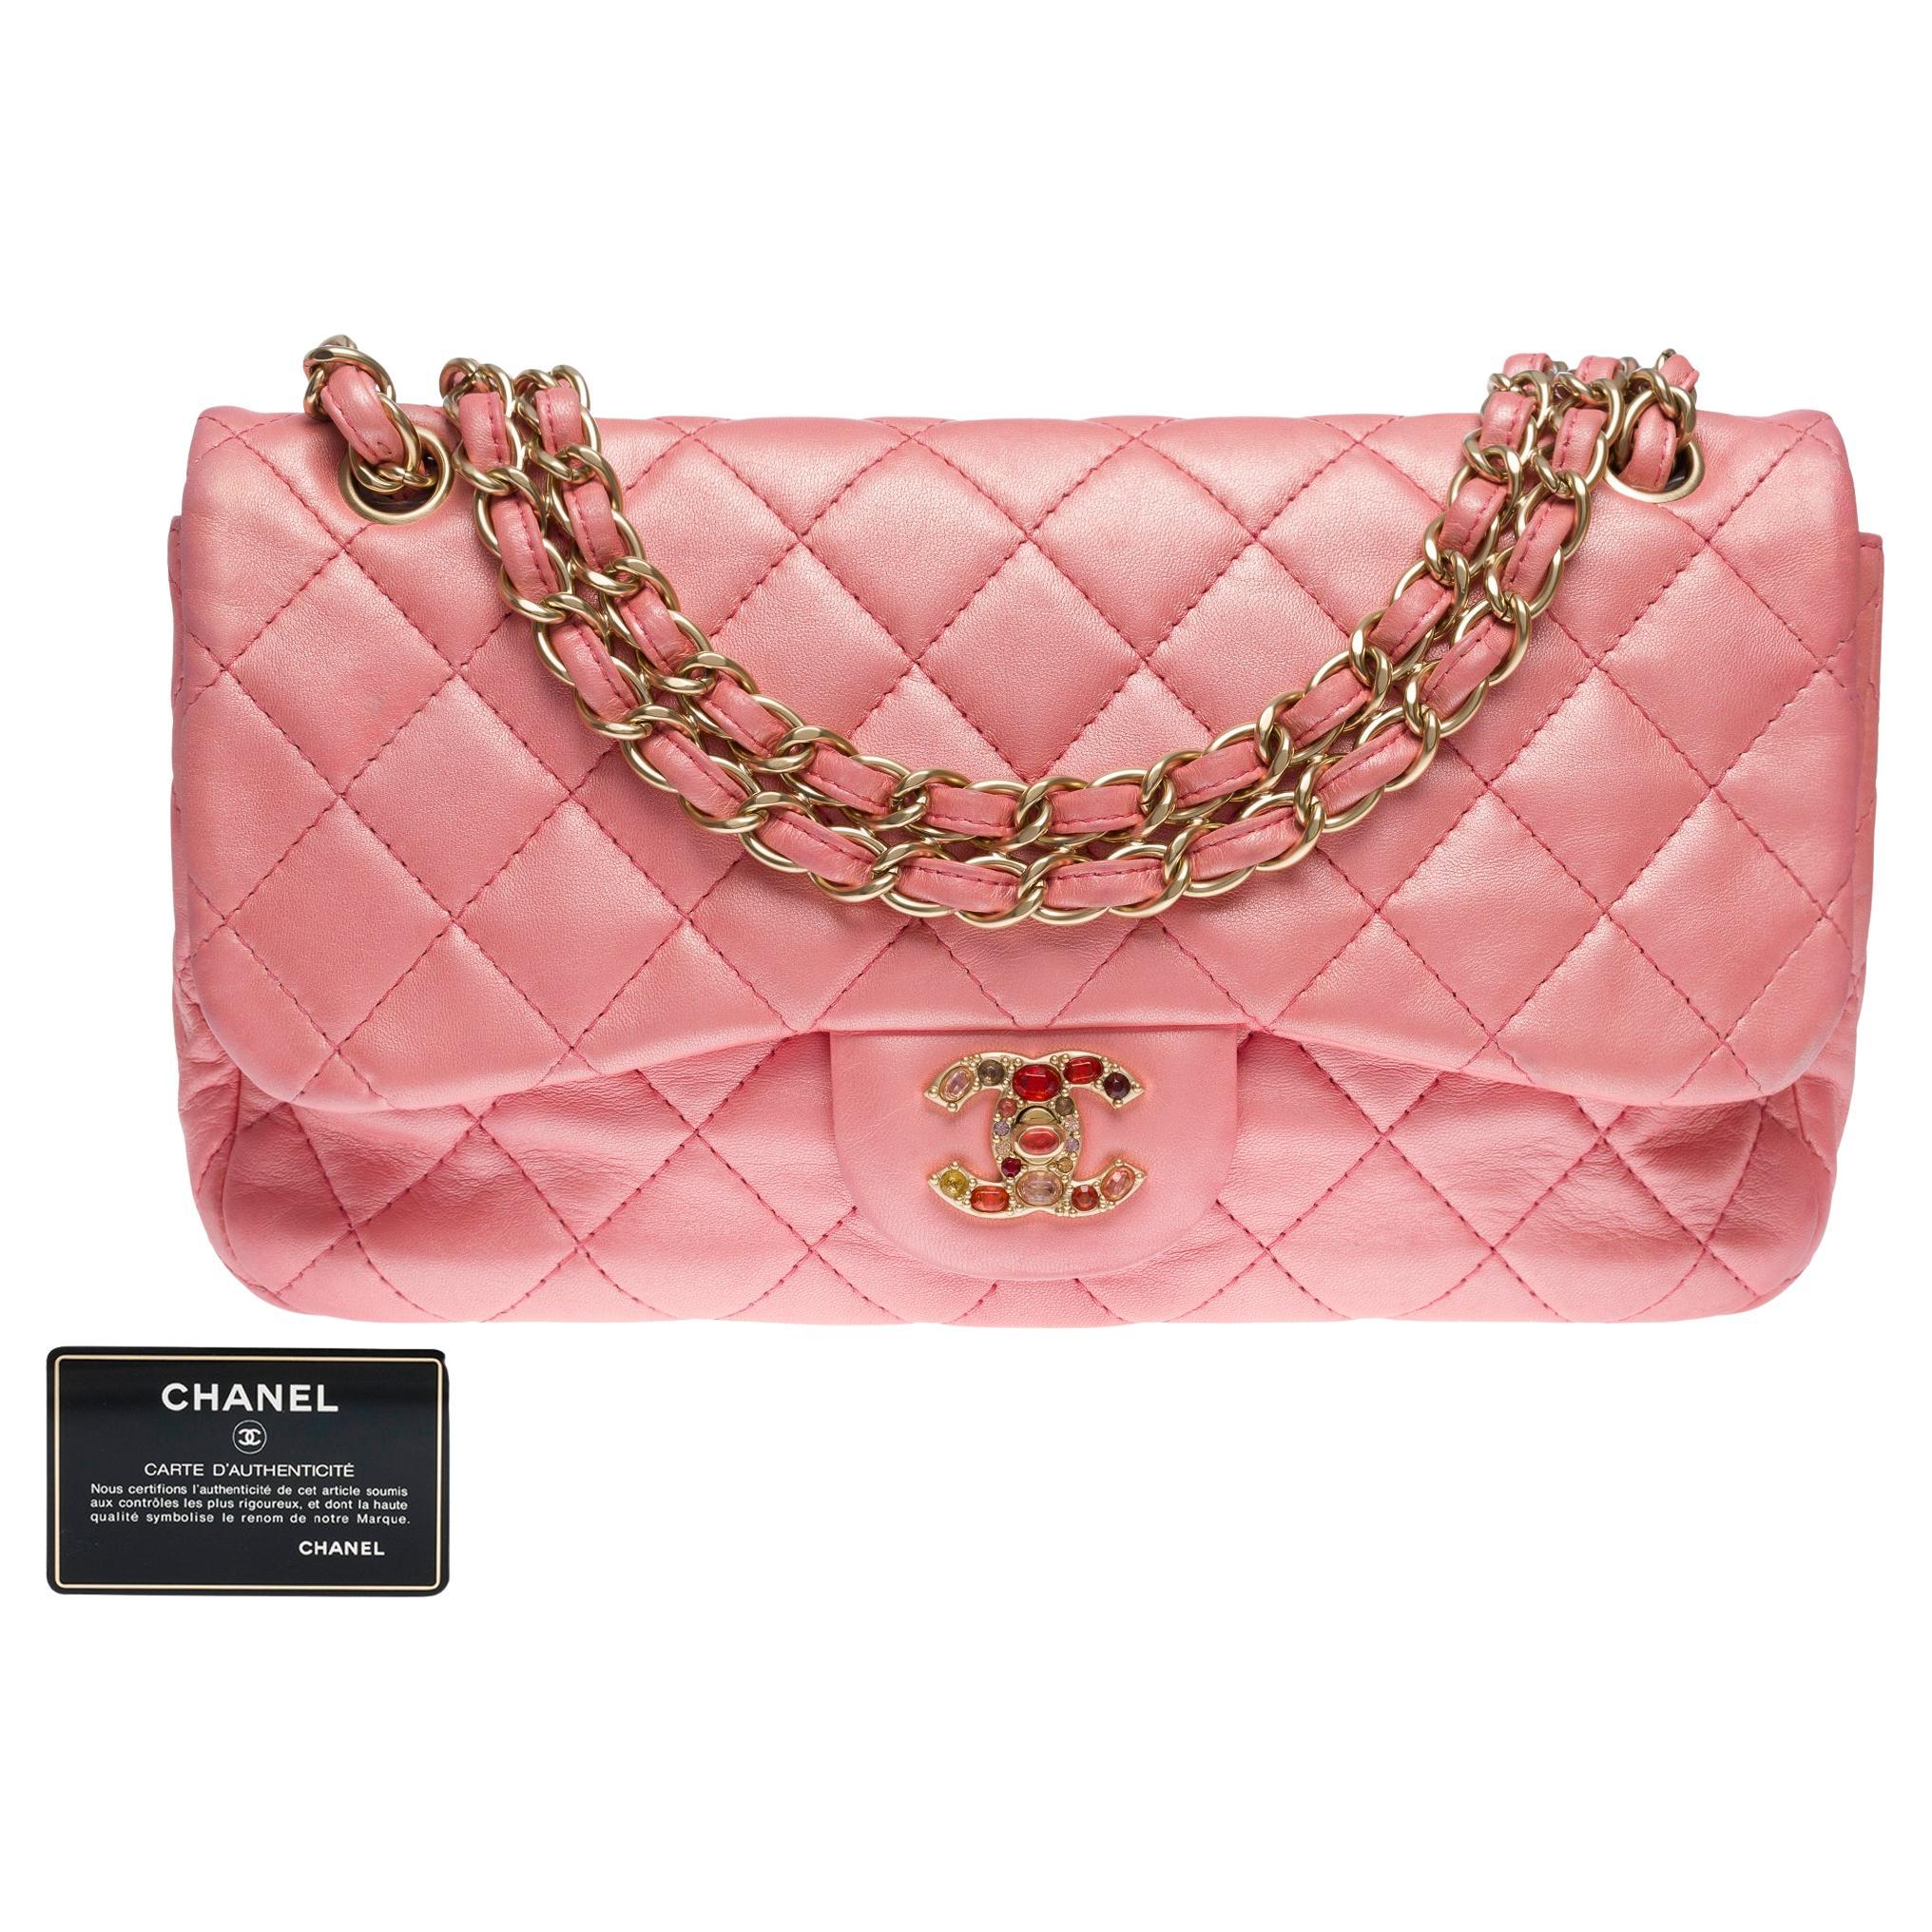 Chanel limited edition shoulder flap bag in Metallic Pink quilted leather,  MGHW